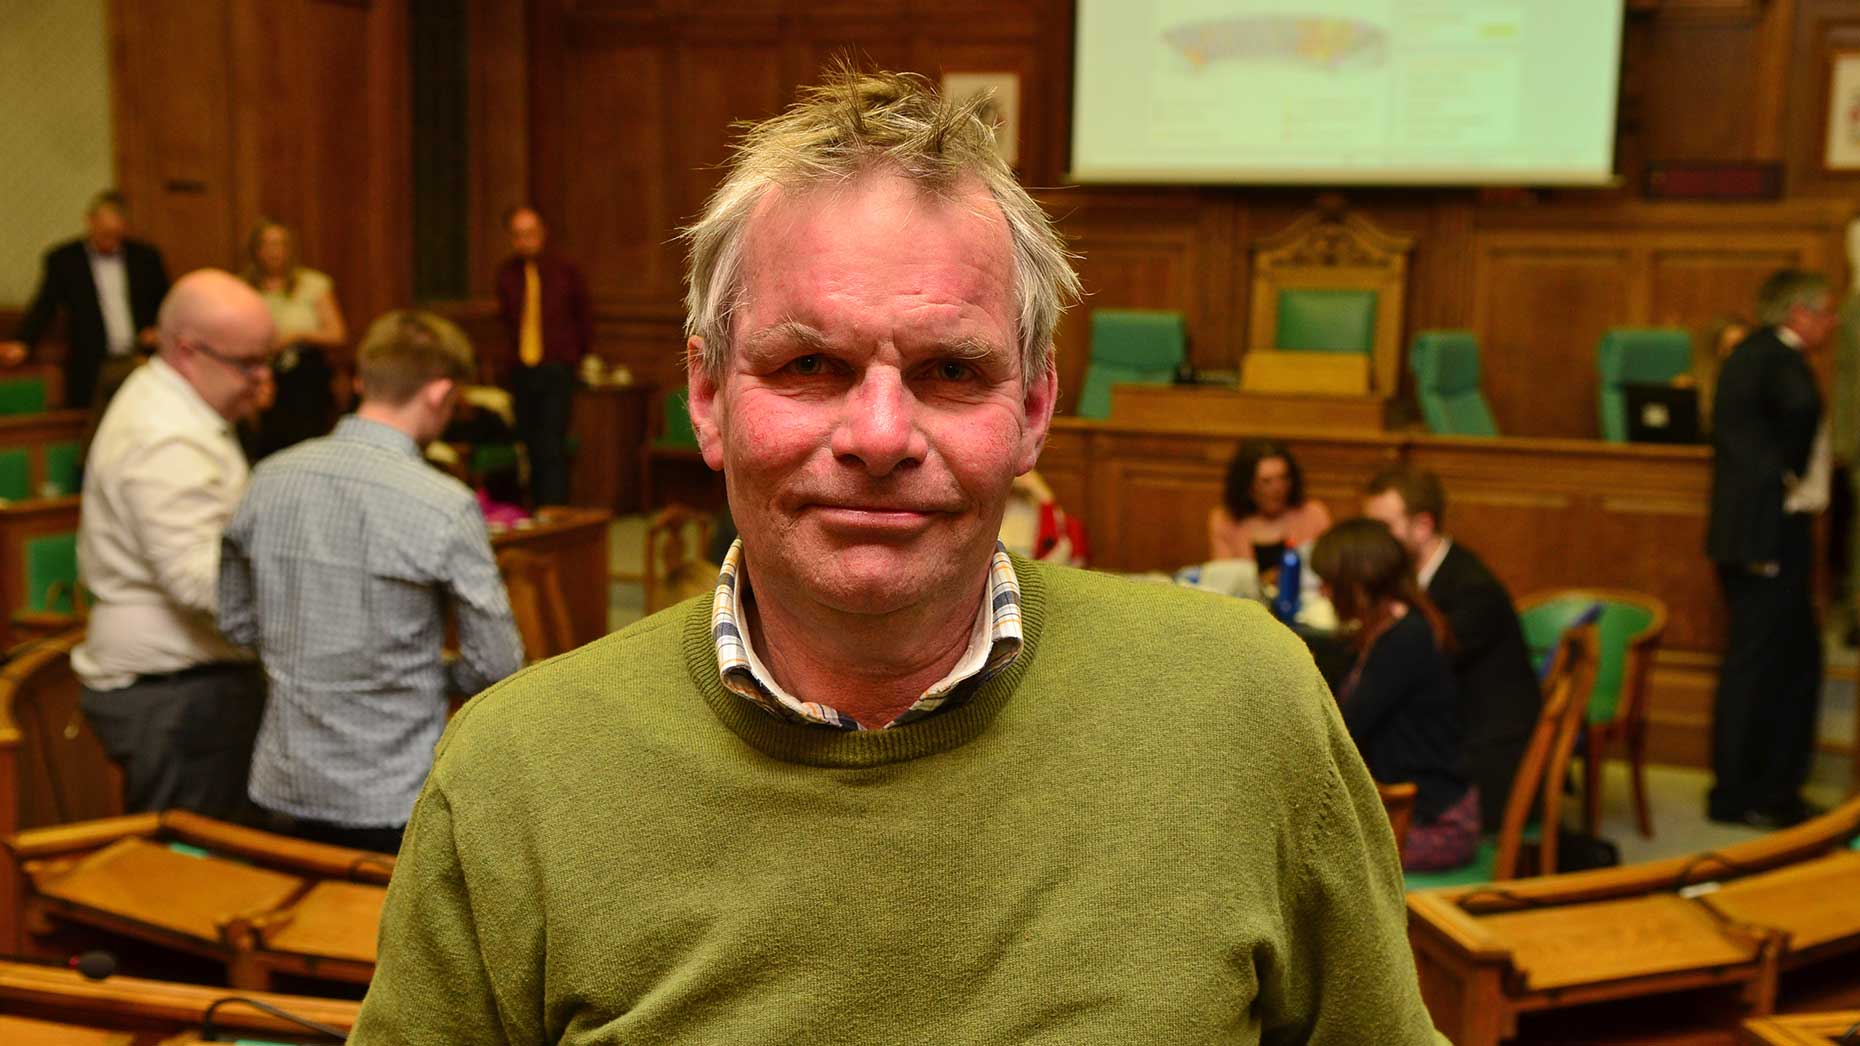 Lincolnshire County Council Leader Martin Hill. Photo: Steve Smailes for The Lincolnite